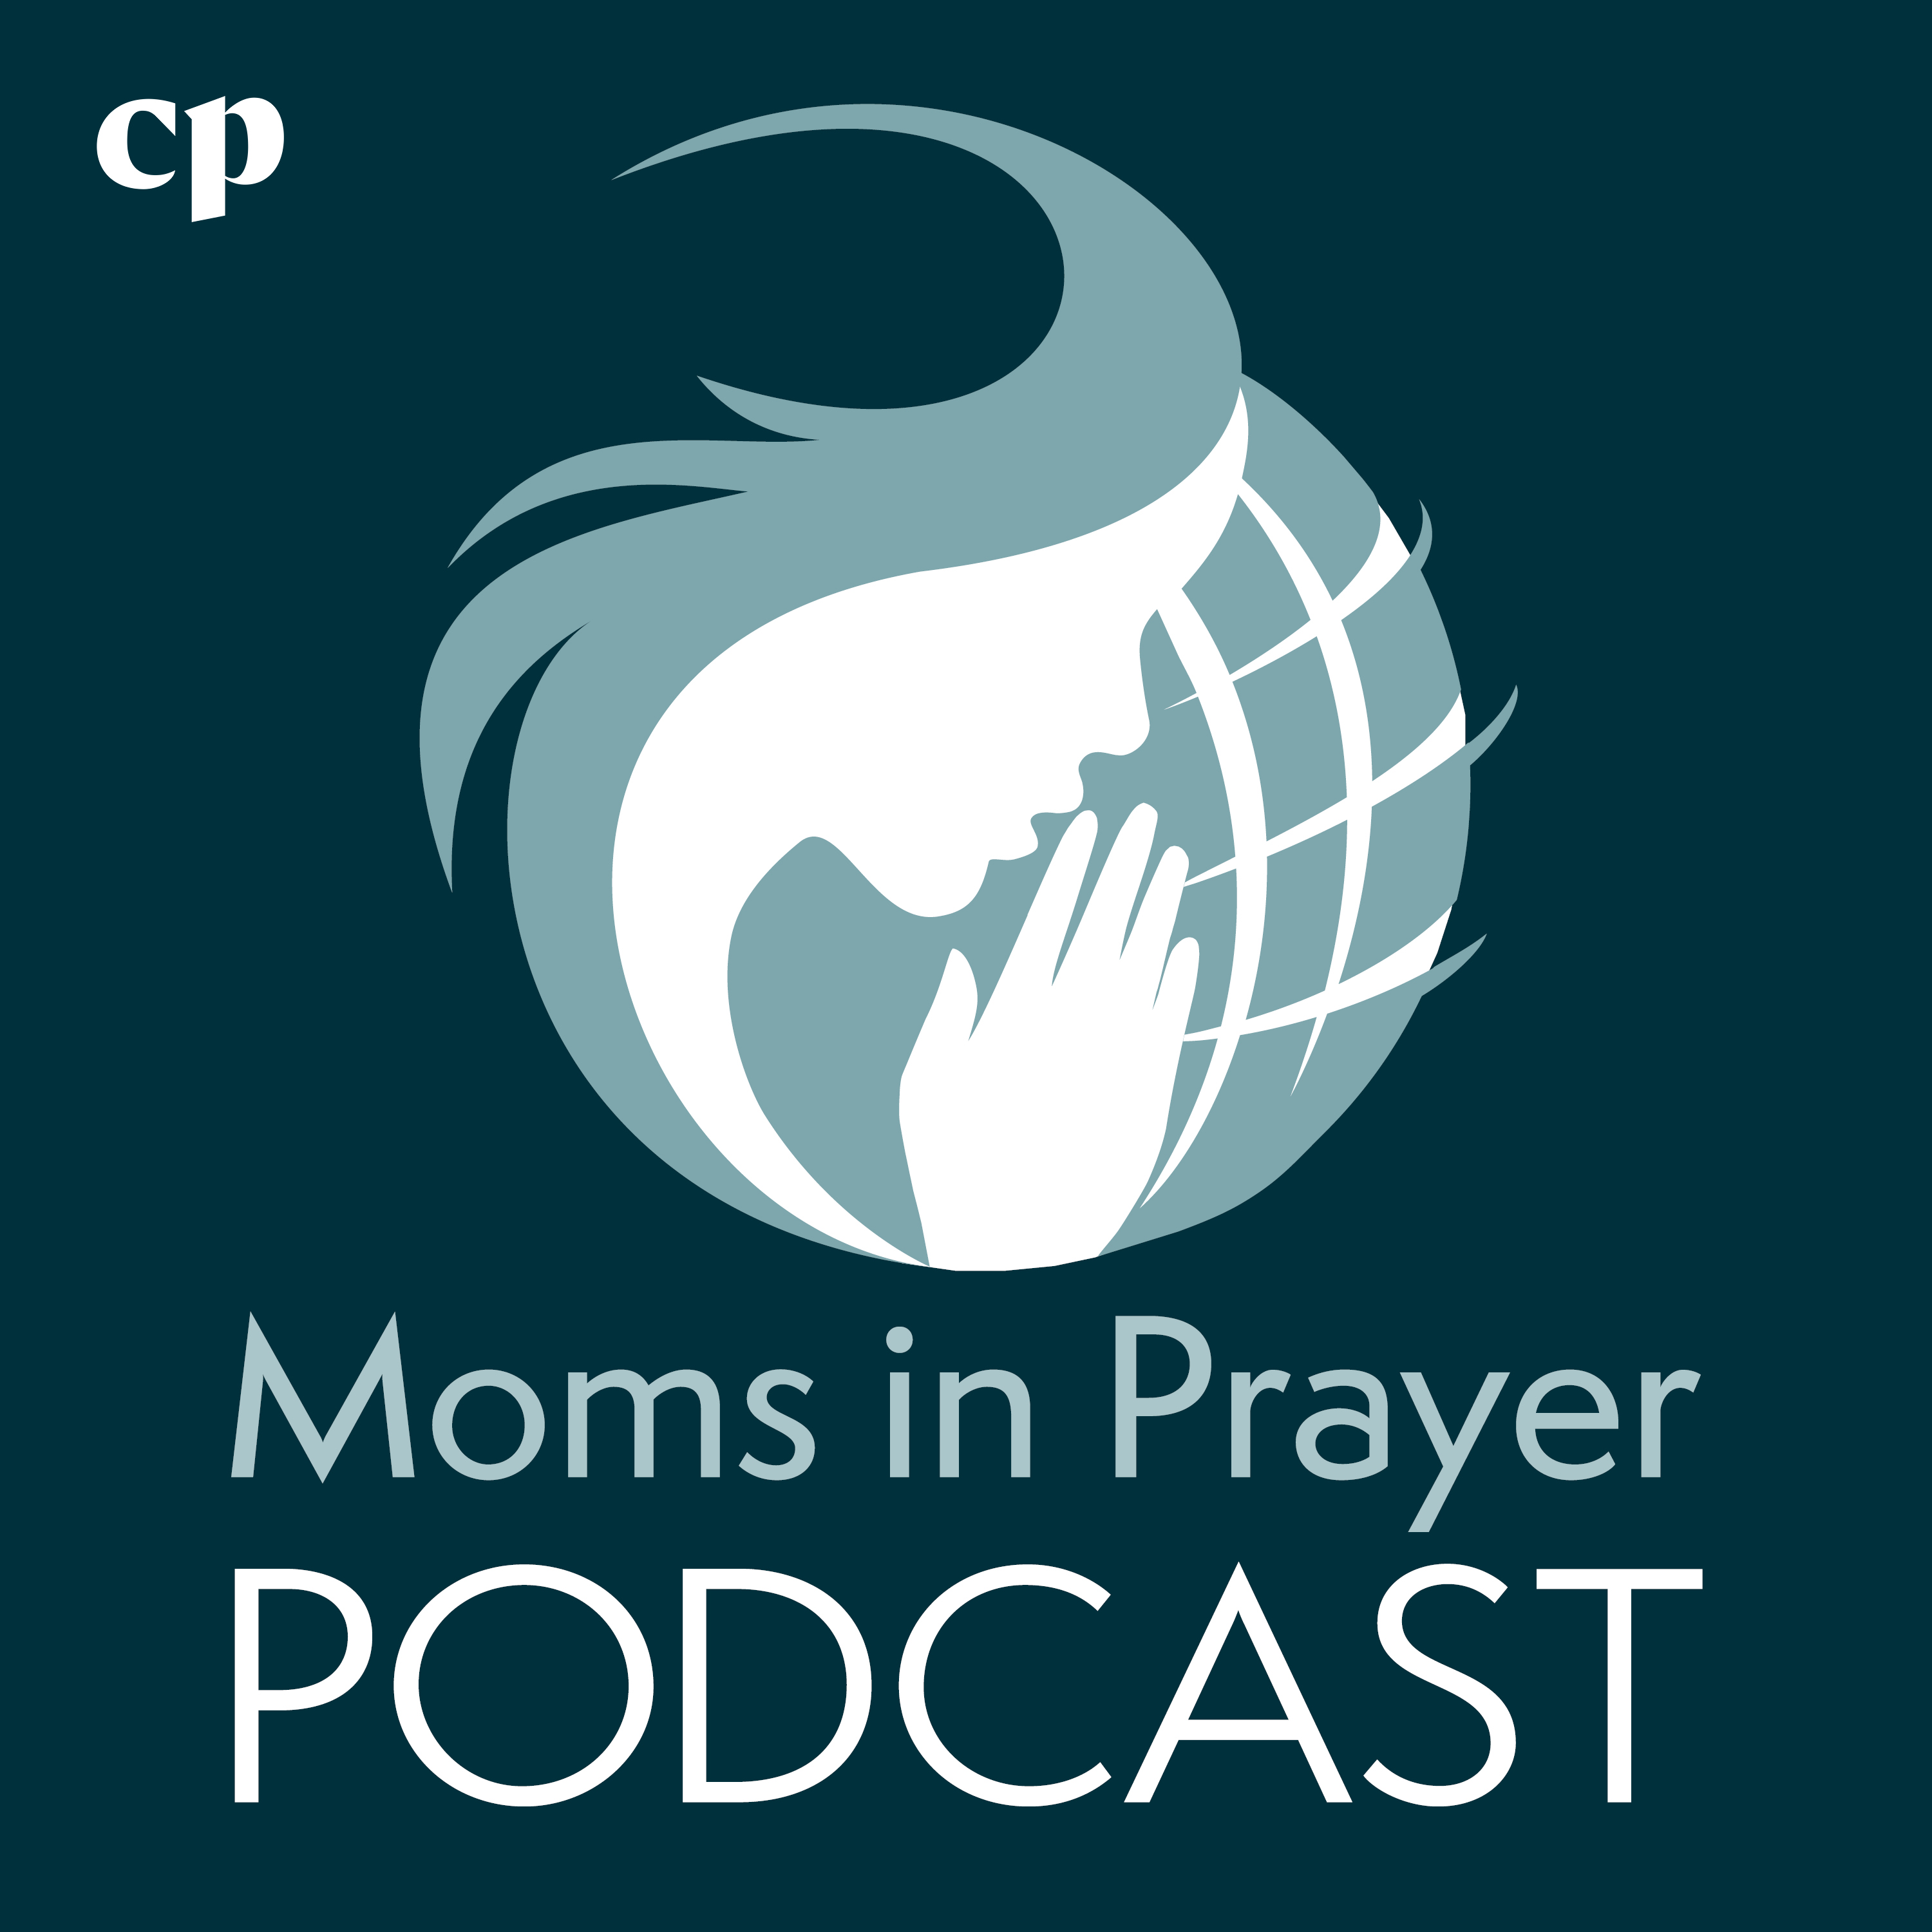 Episode 125 - Praying When You Are Threadbare with Stacey Thacker